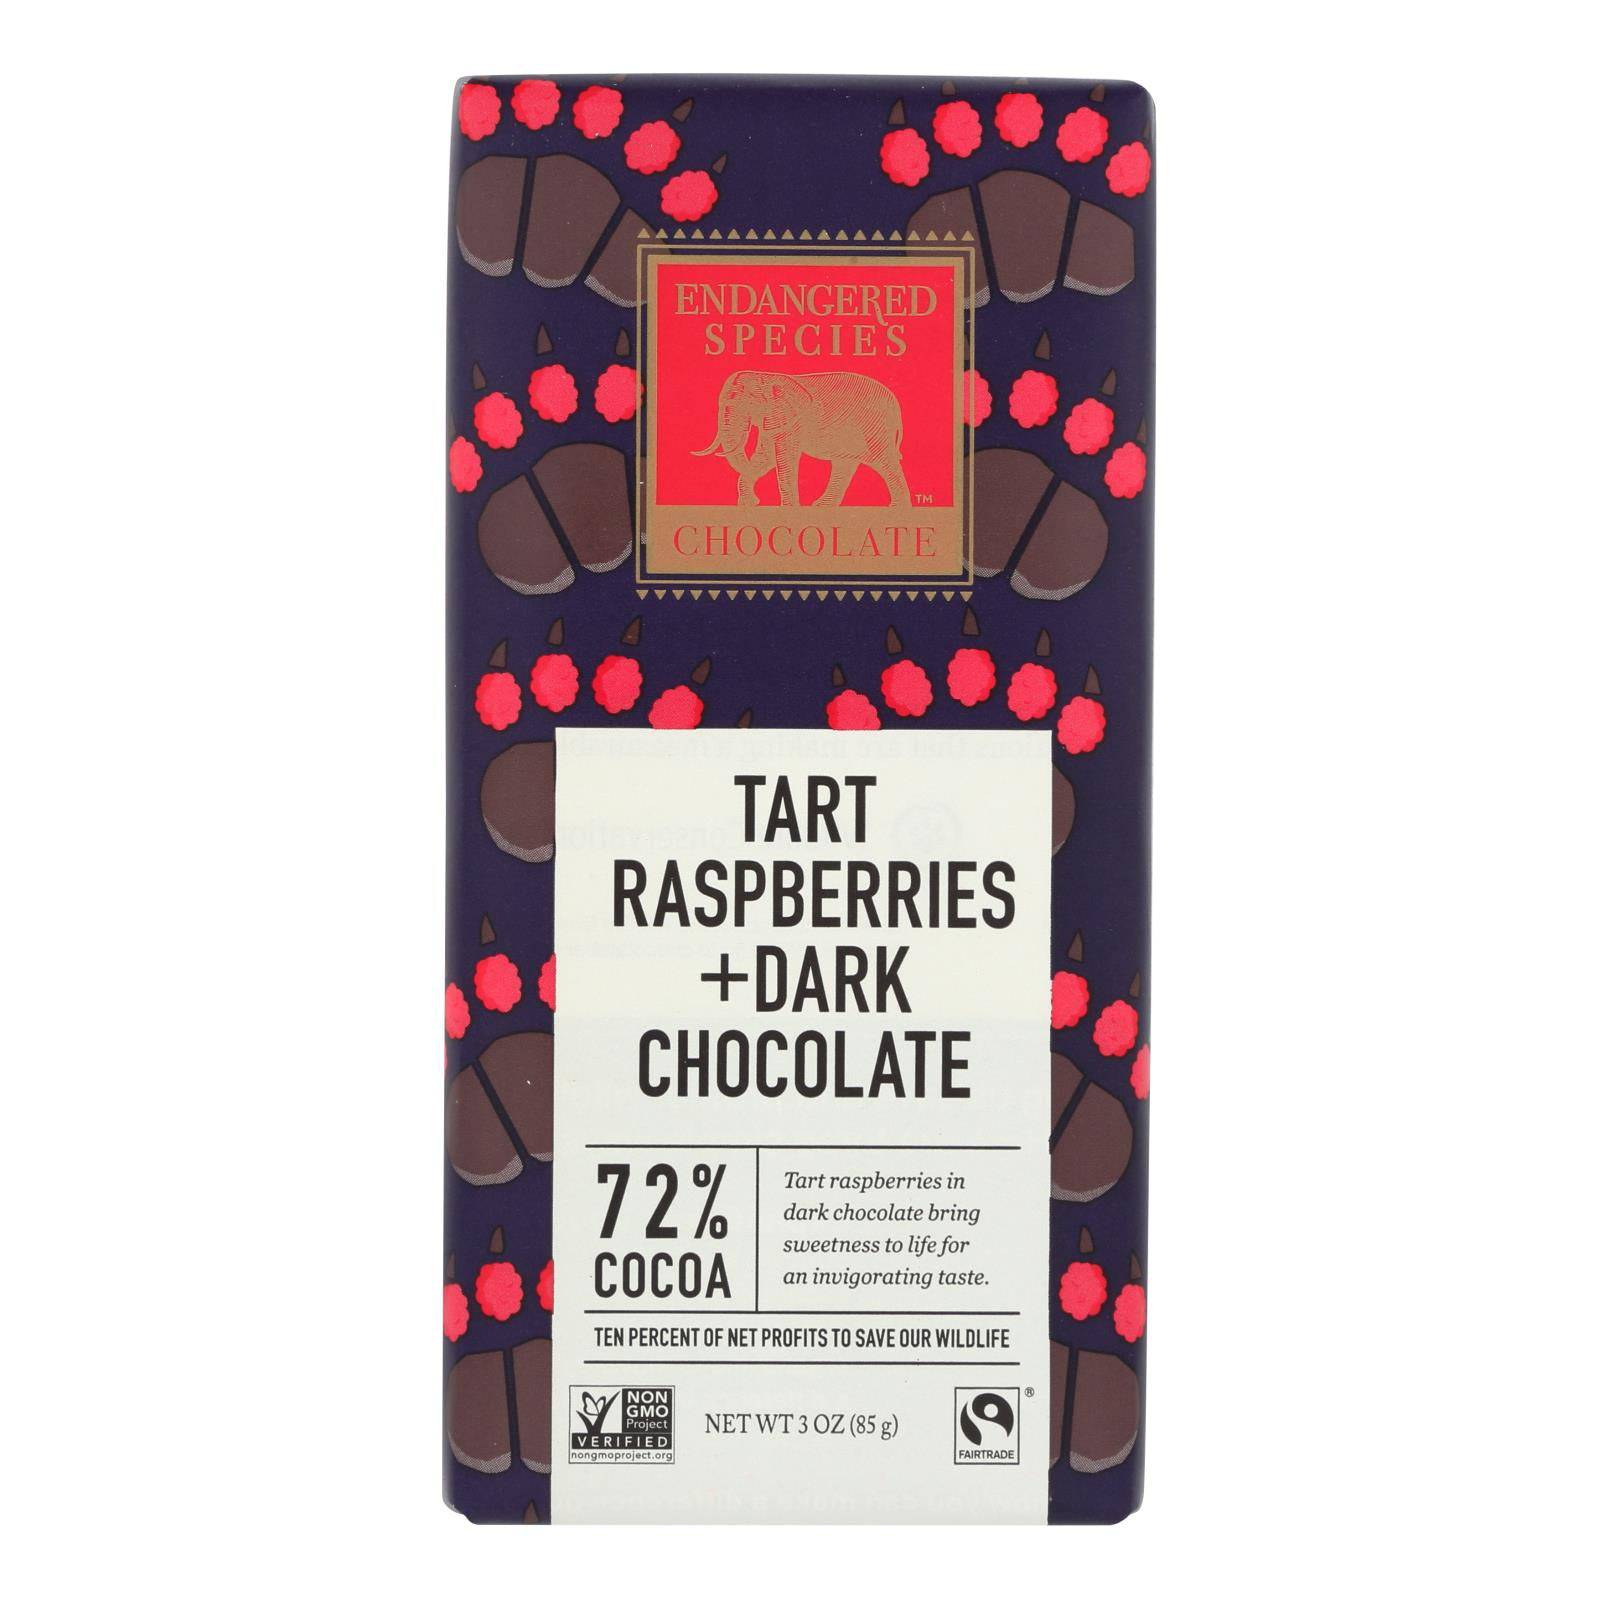 Buy Endangered Species Natural Chocolate Bars - Dark Chocolate - 72 Percent Cocoa - Raspberries - 3 Oz Bars - Case Of 12  at OnlyNaturals.us